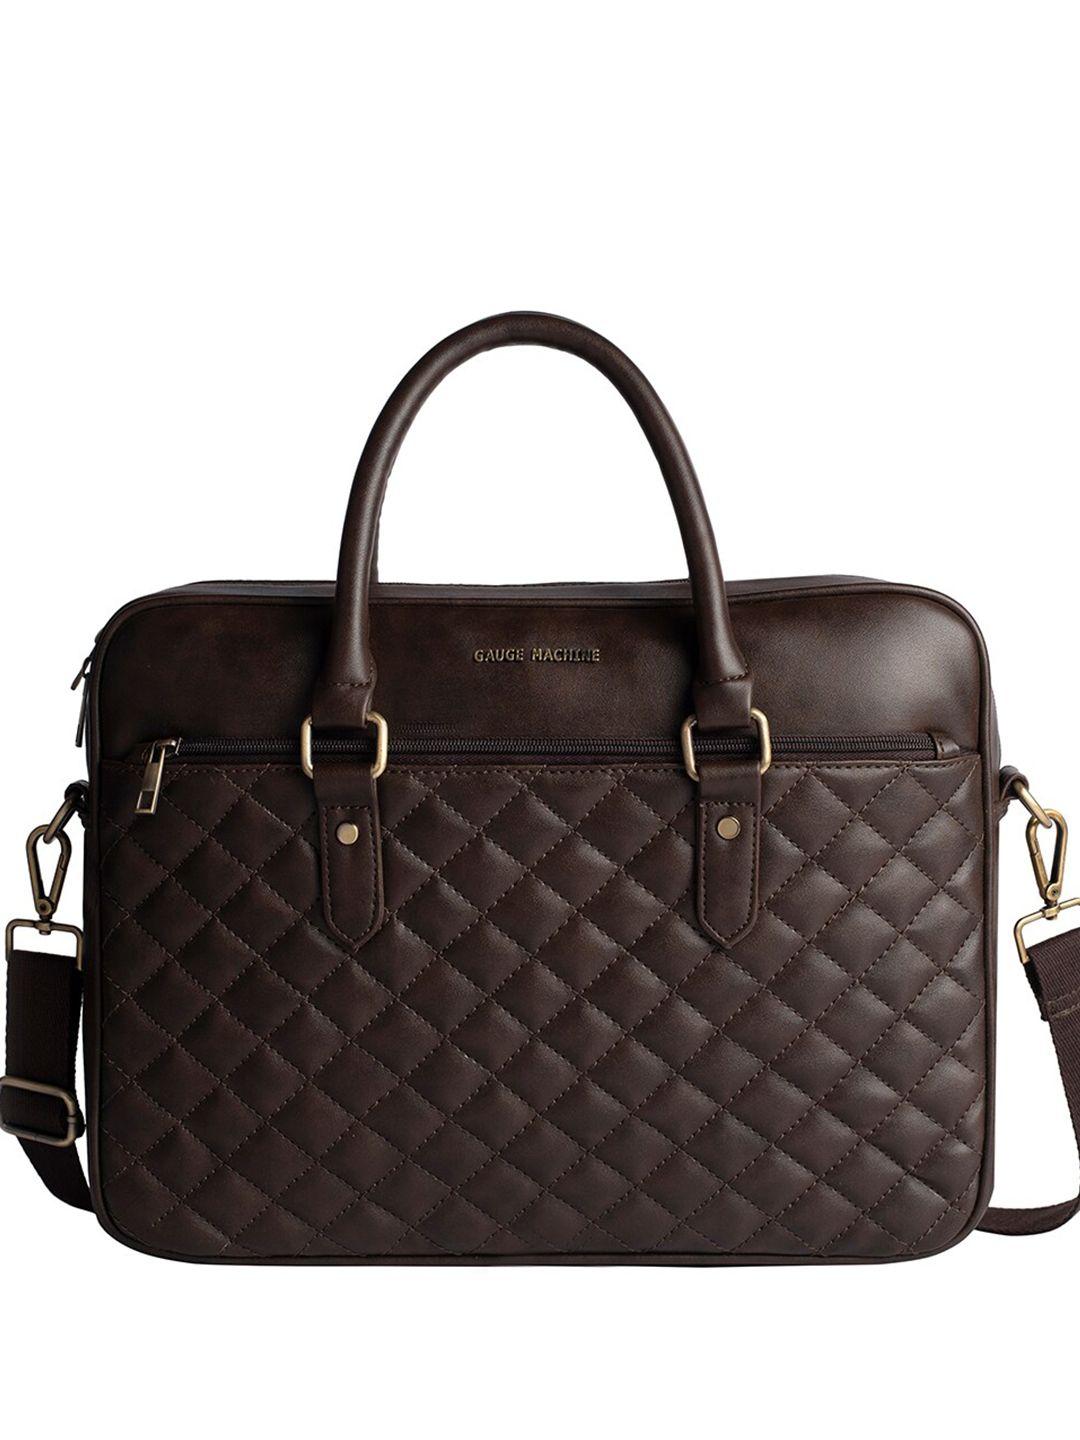 gauge machine unisex quilted leather laptop bag